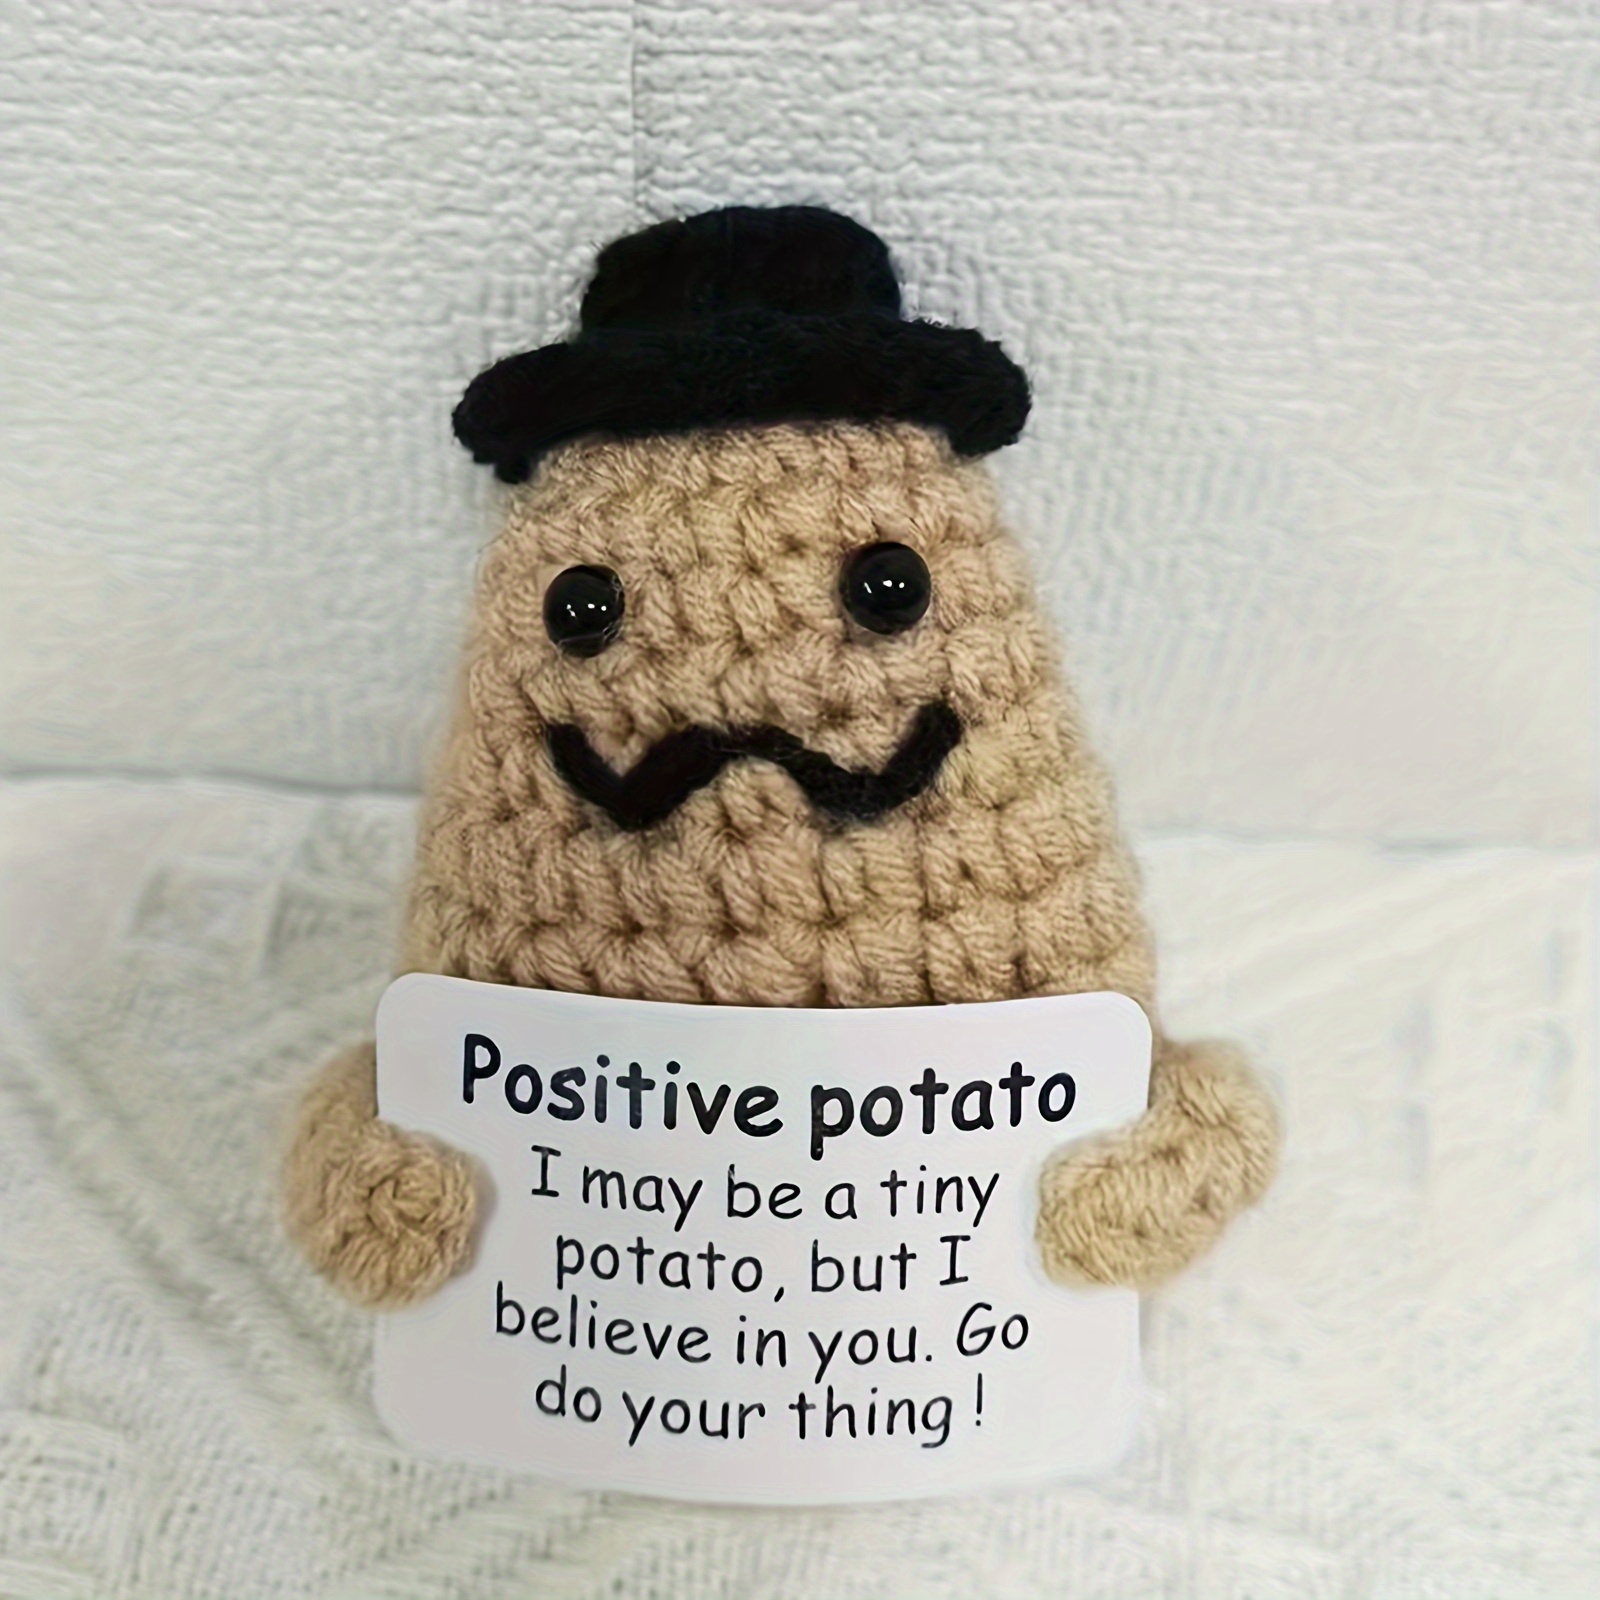 Positive Potato, Positive Potato Crochet Doll Knitted Potato Toy with  Positive Card, Encouragement Gifts Funny Gifts for Birthday Gifts Home  Decor